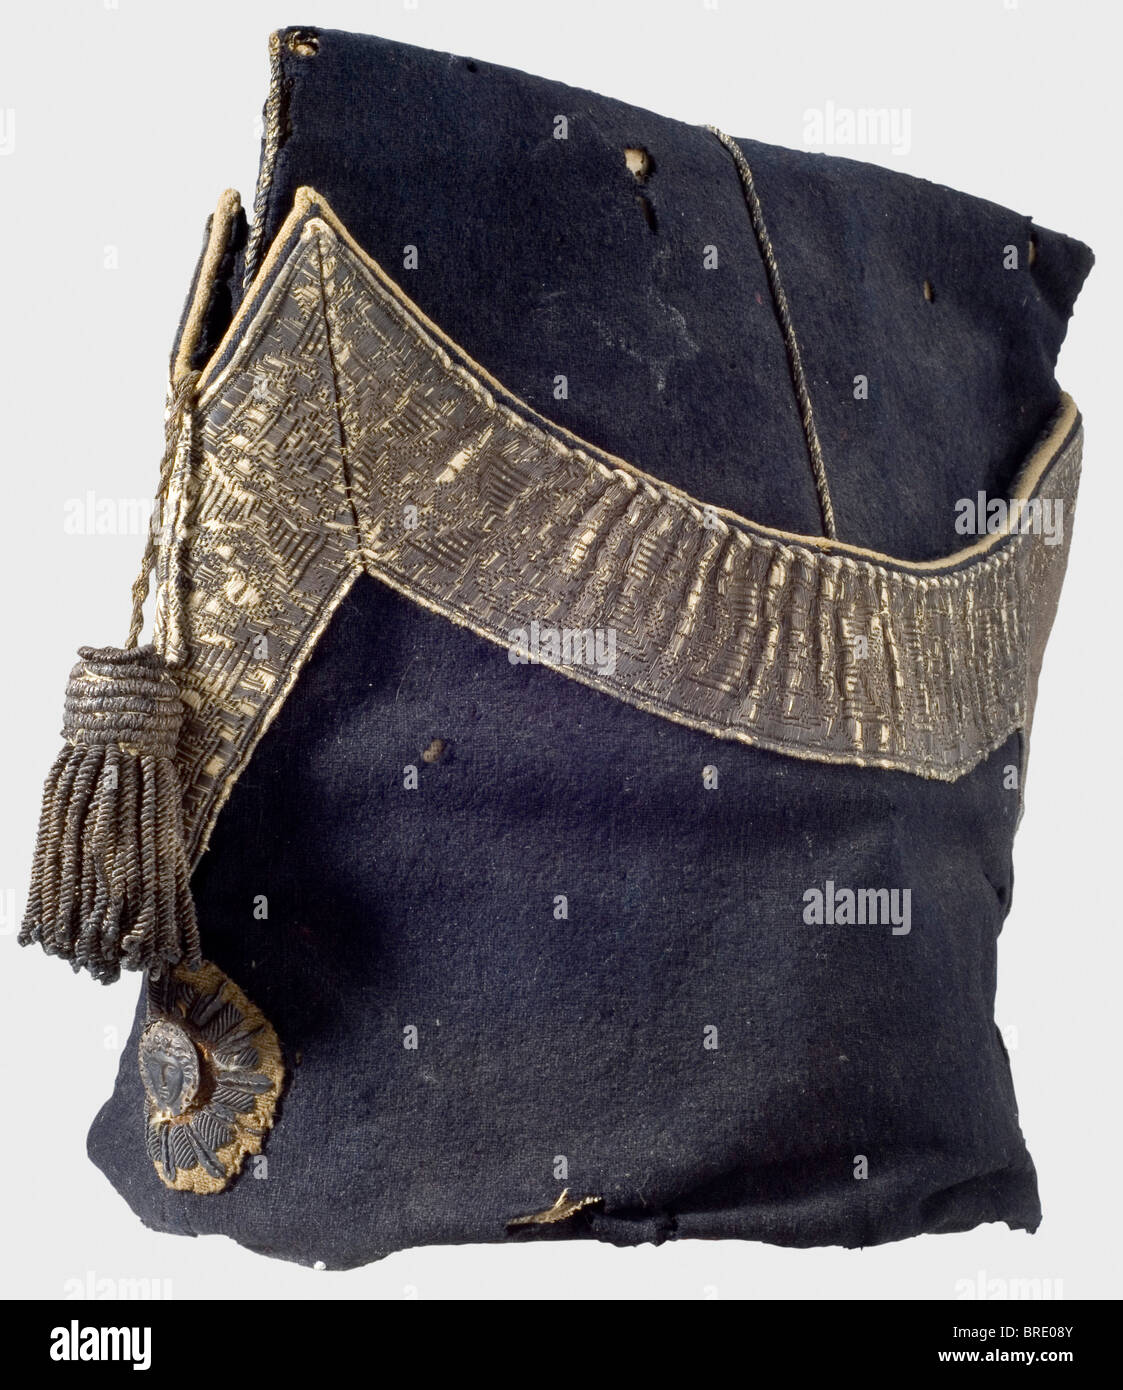 A garrison cap for enlisted men of the Gardes de Corps du Roi, as worn after 1814 Cap of dark blue cloth with silver braid lace, an attached spun silver tassel, and an embroidered emblem bearing the Medusa head. The interior lined with leather, and bearing an old 'Collection André Thélot' label, with the hand-written description, 'Bonnet de Police des Gardes du Corps Compagnie de Luxembourg Maison du Roi 1815'. The cloth shows insect damage in places. The braid is rubbed and darkened. The leather lining shows marks of wear. Height 22 cm. Interesting example of , Stock Photo